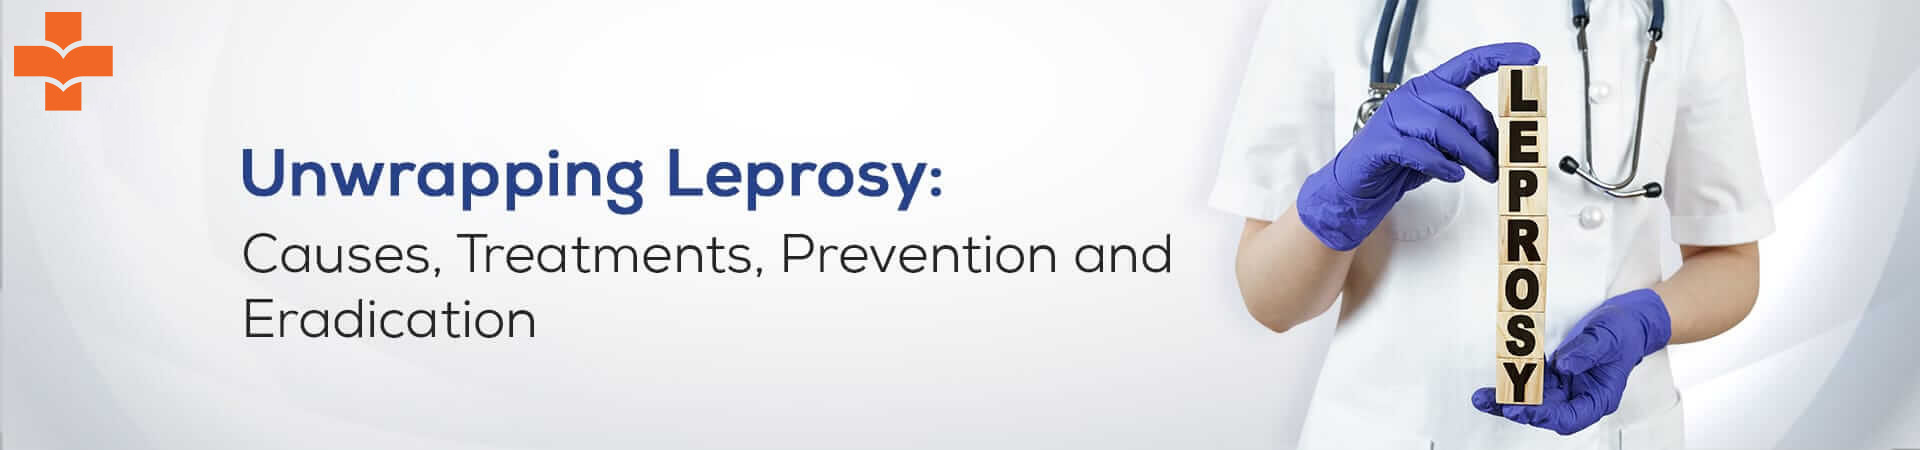 Leprosy causes symptoms and treatment